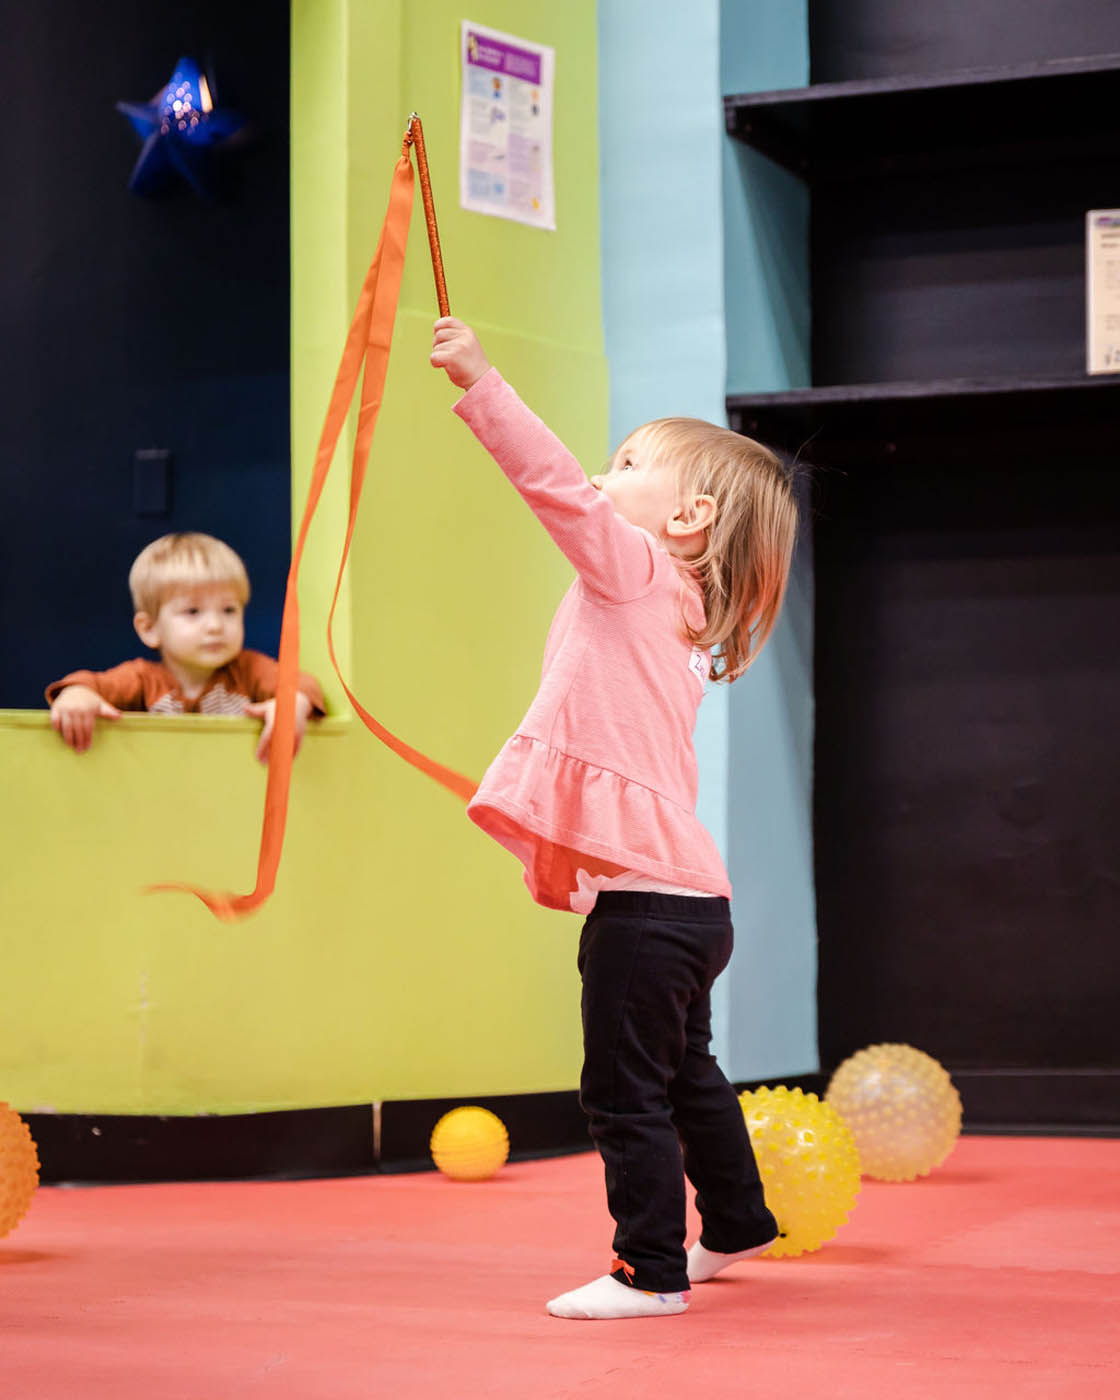 A little girl playing with ribbons and increasing her motor skills in sports classes with Romp n' Roll Charlotte.